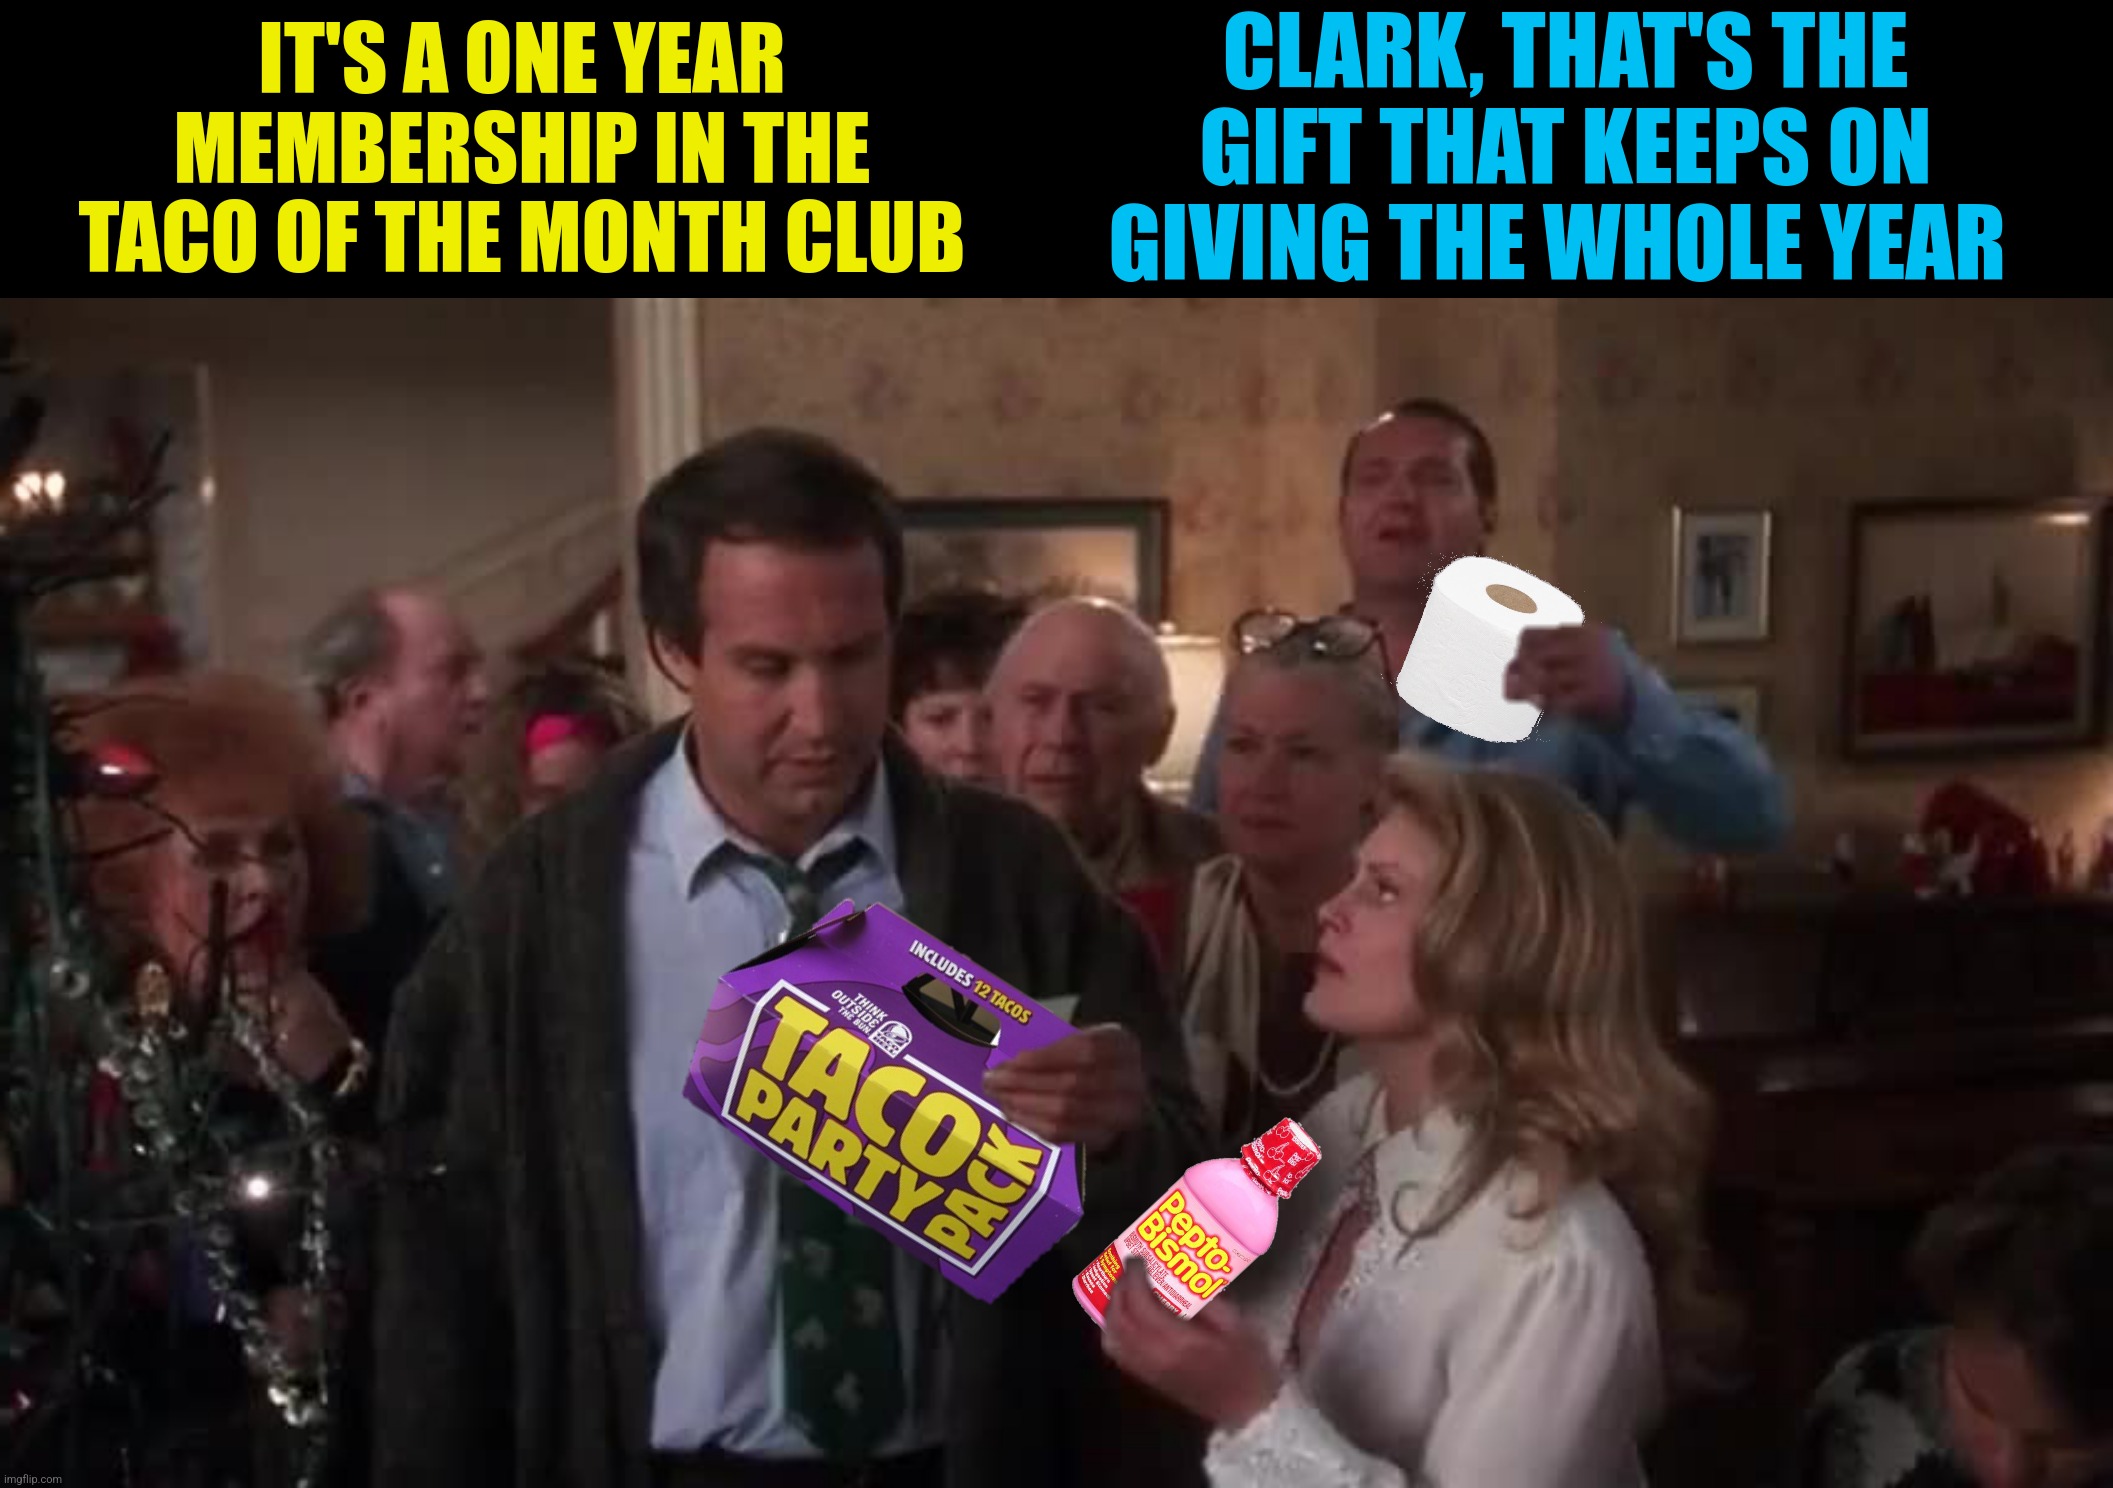 Make a "run" for the border | IT'S A ONE YEAR MEMBERSHIP IN THE TACO OF THE MONTH CLUB; CLARK, THAT'S THE GIFT THAT KEEPS ON GIVING THE WHOLE YEAR | image tagged in bad photoshop,christmas vacation,taco bell,taco of the month club | made w/ Imgflip meme maker